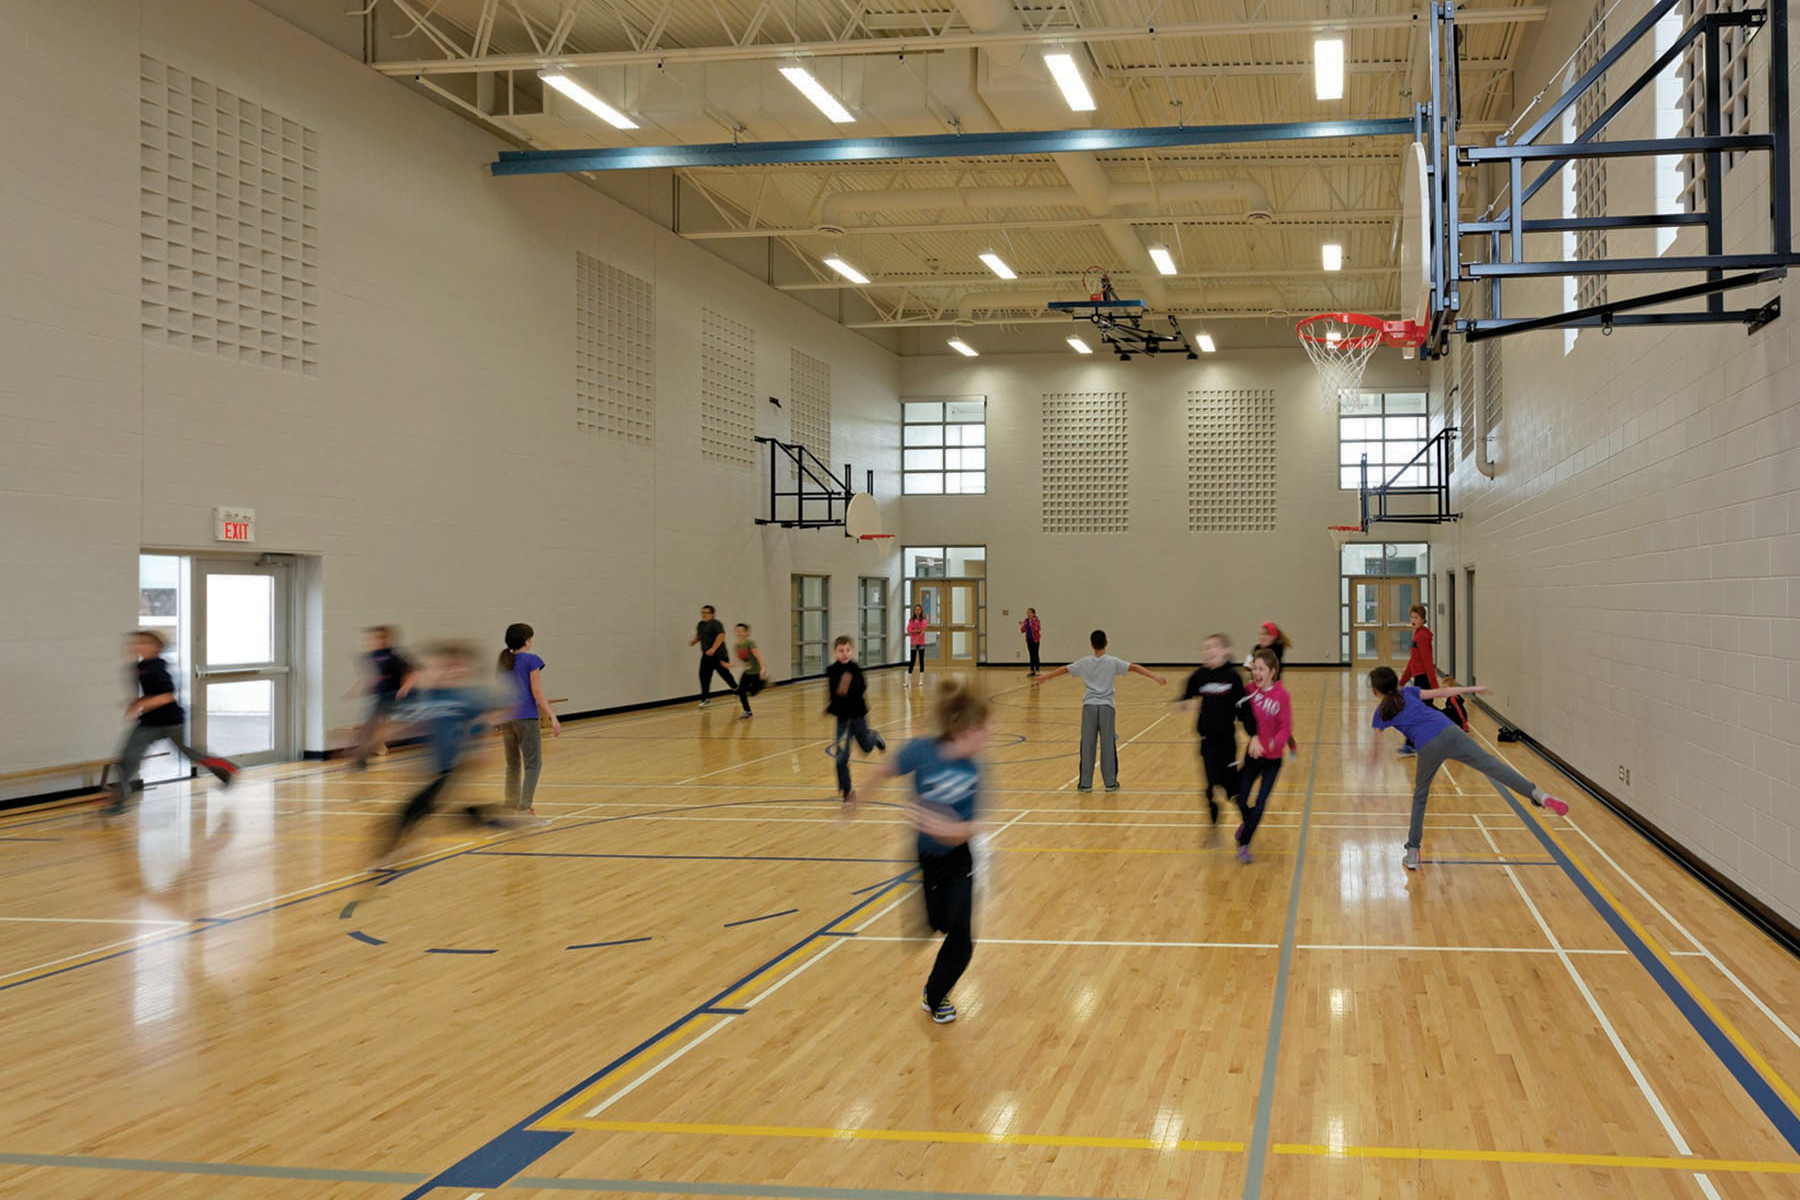 Students playing dodgeball in gymnasium with basketball nets and exposed white ceiling structure